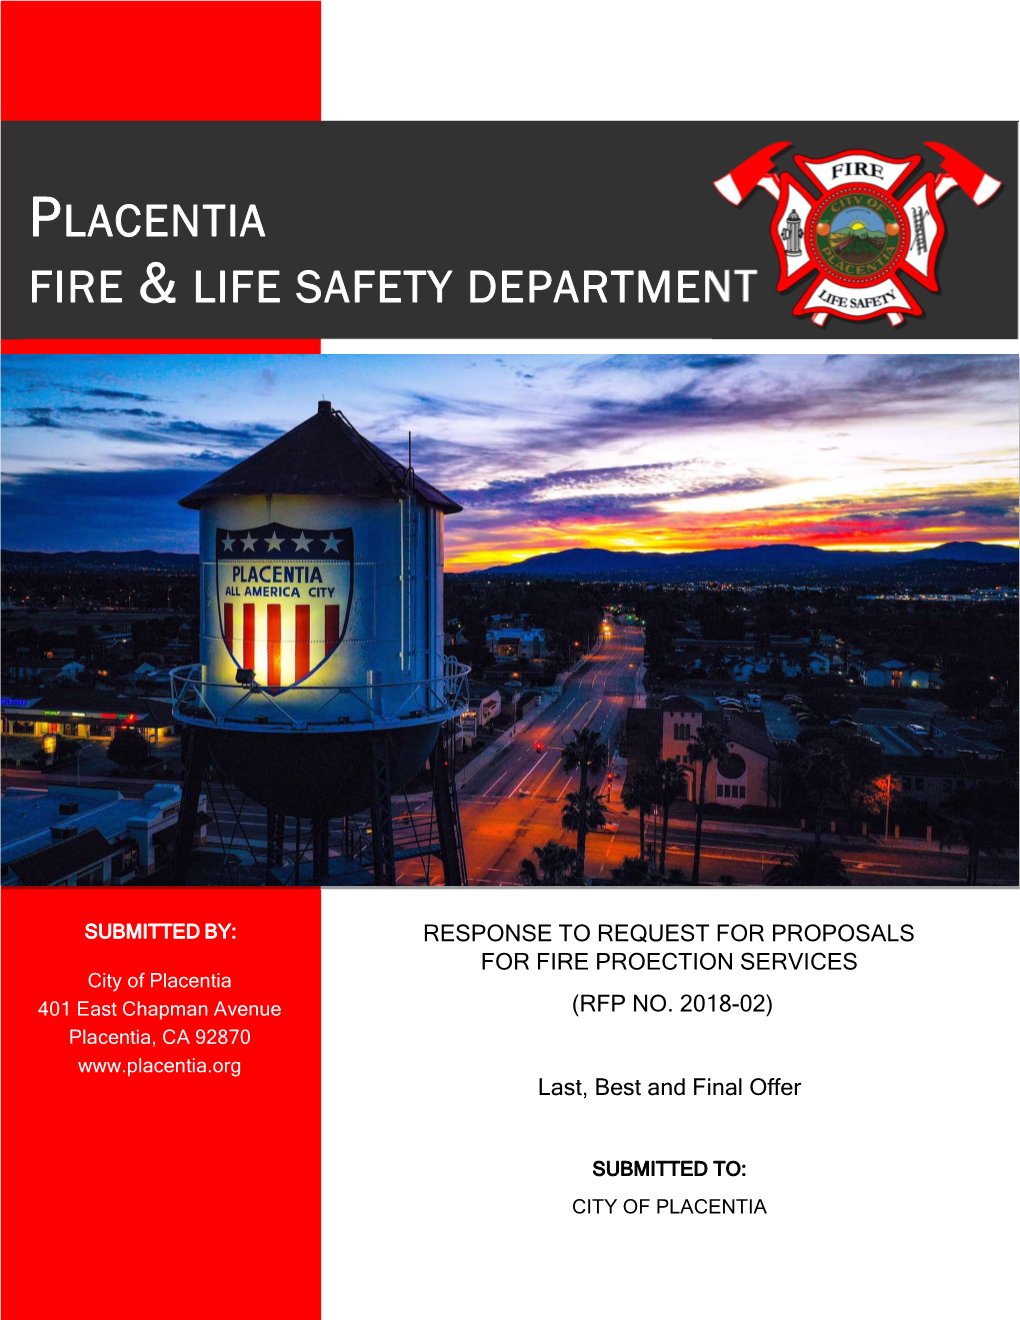 Fire & Life Safety Department